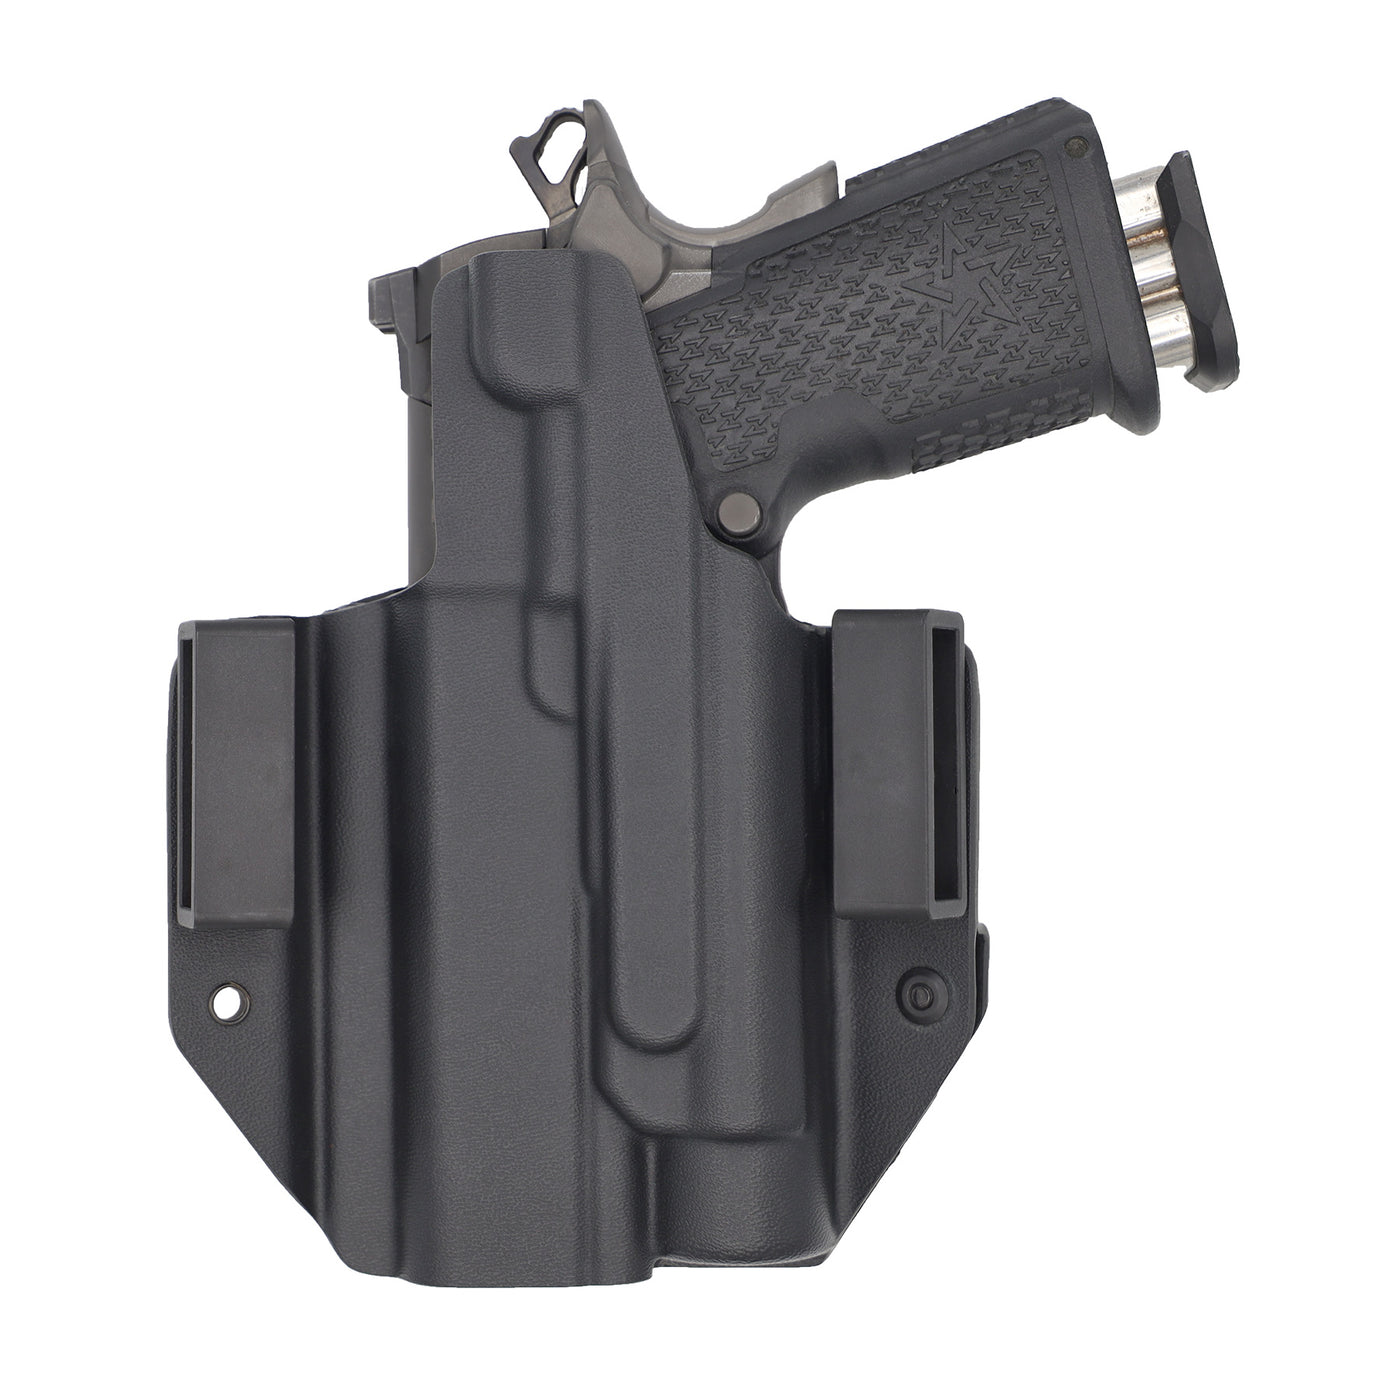 C&G Holsters Custom OWB tactical 1911/2011 Streamlight TLR-1 in holstered position back side